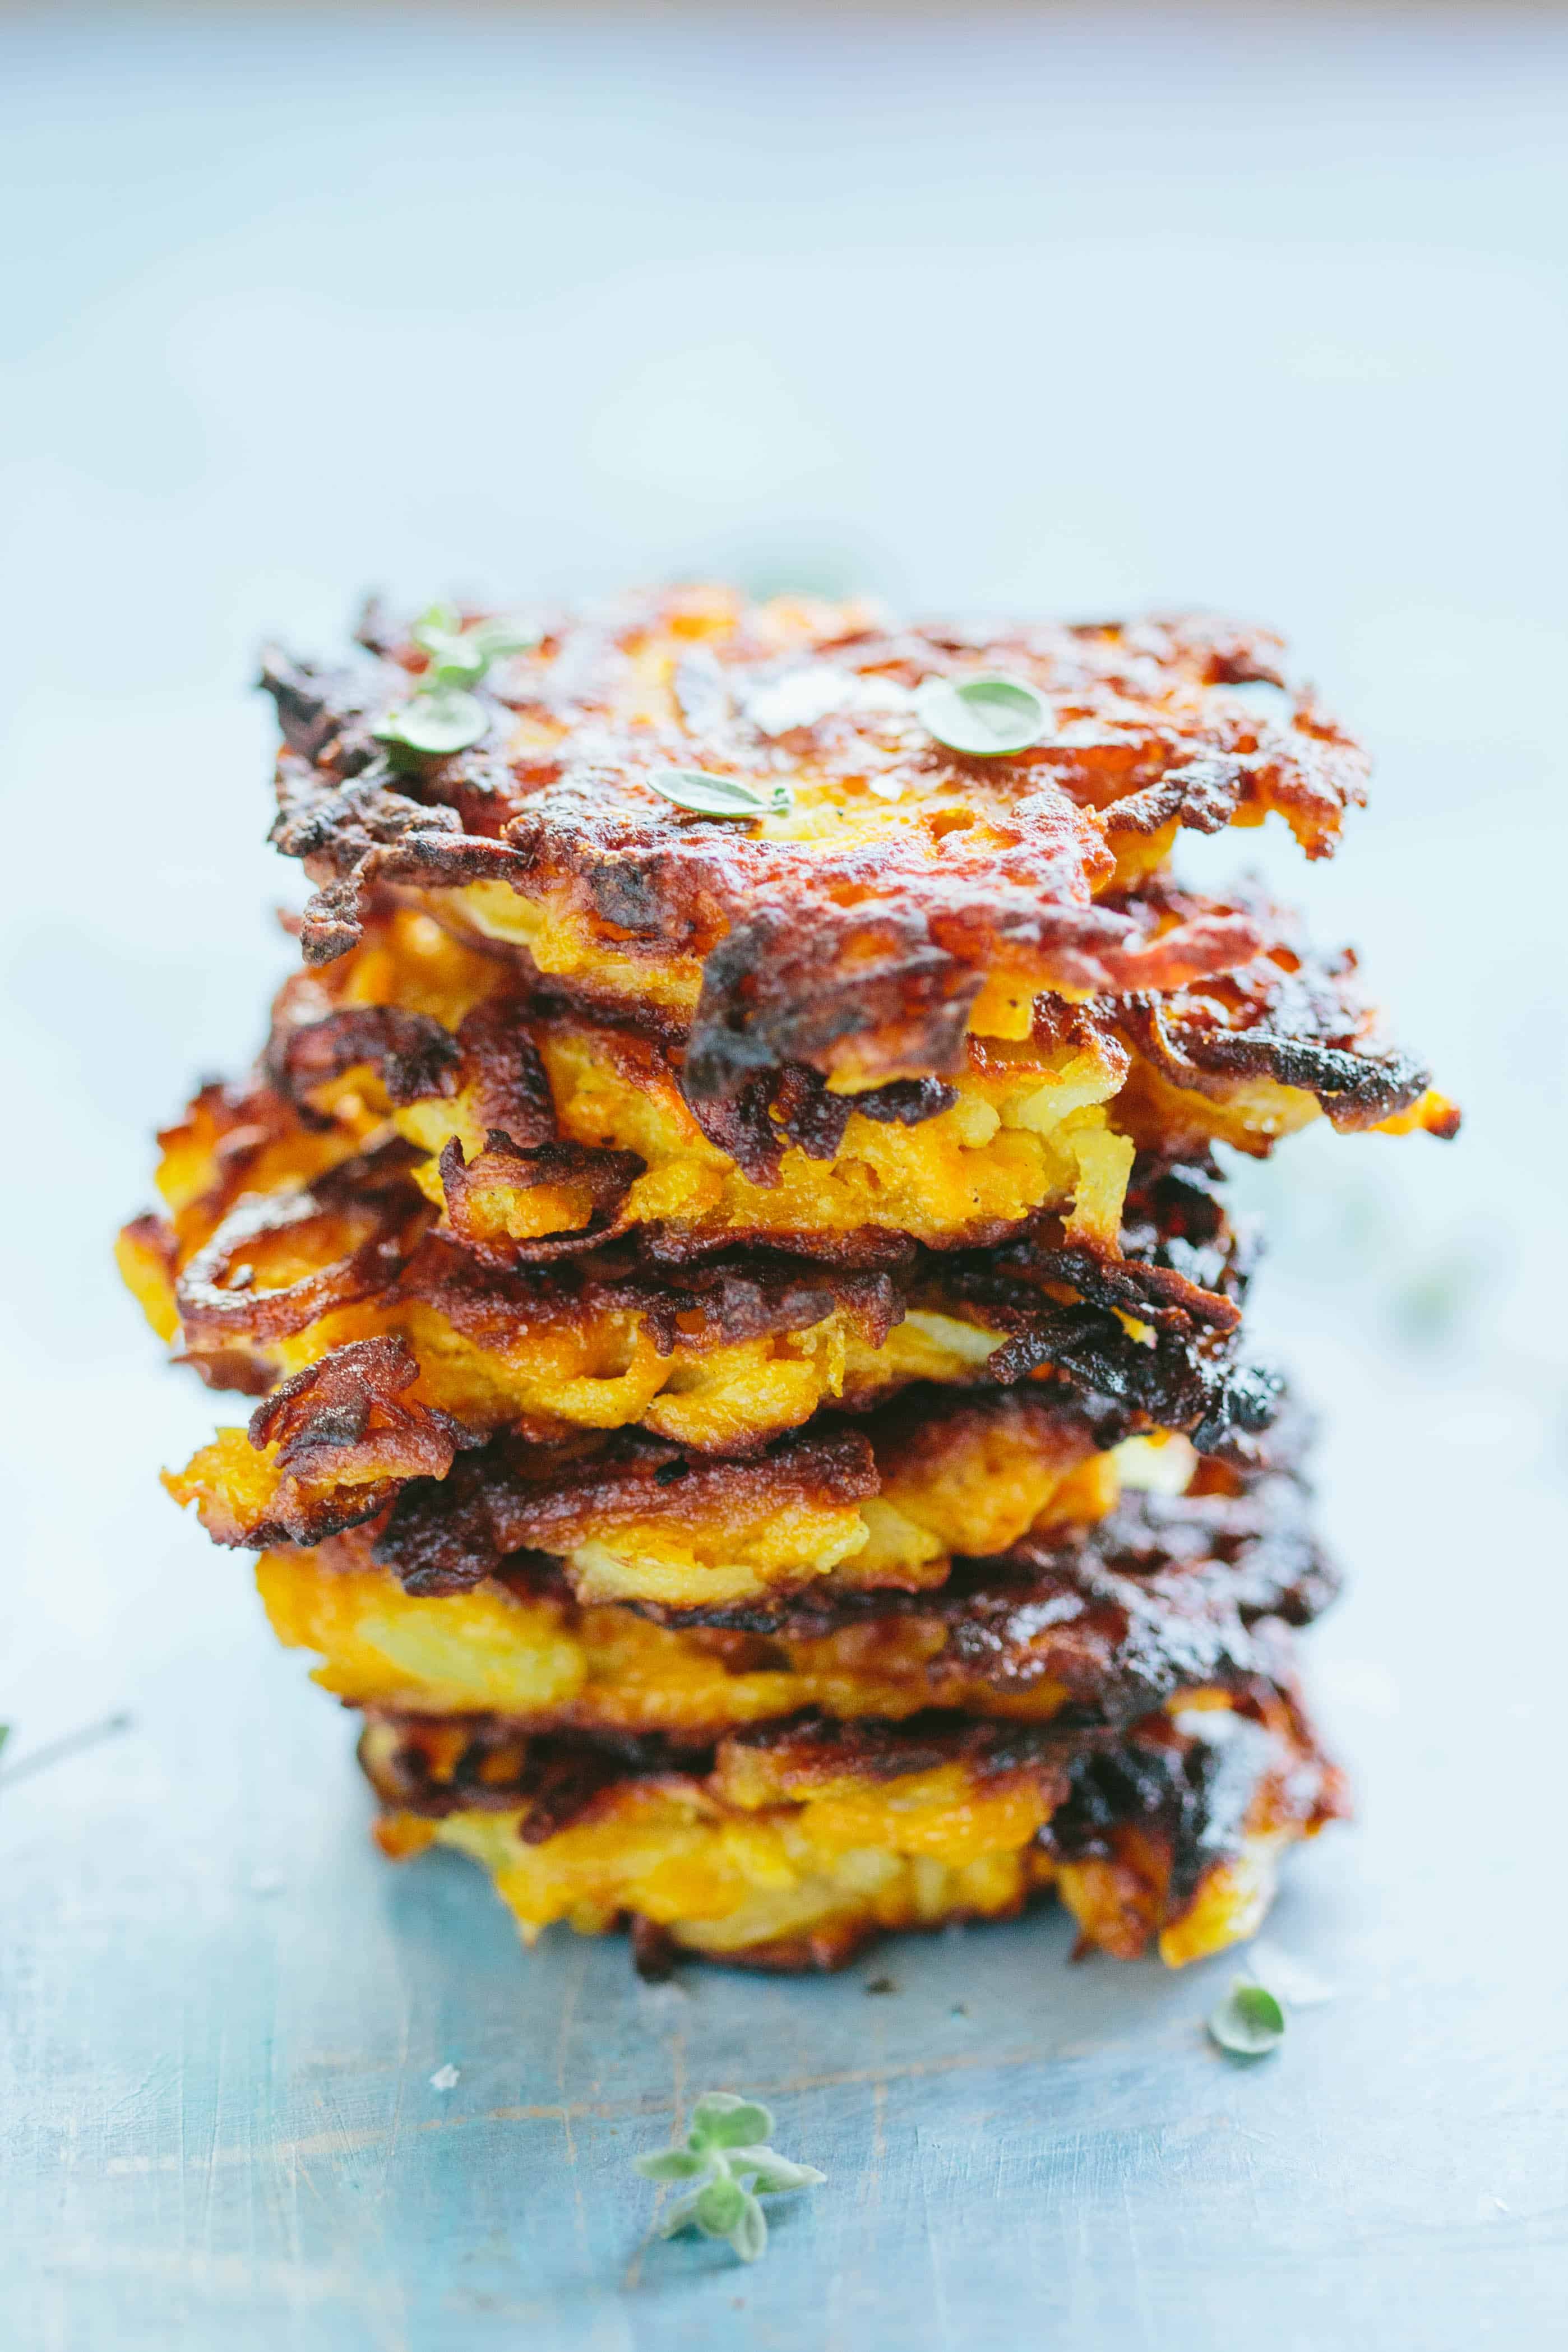 BUTTERNUT SQUASH FRITTERS with Spiced Yogurt | Best gluten free butternut squash fritters made with chick pea flour! Appetizer, side dish or light dinner #Thanksgiving #entertaining #recipe #butternut #squash #party #easy #glutenfree | ColeyCooks.com